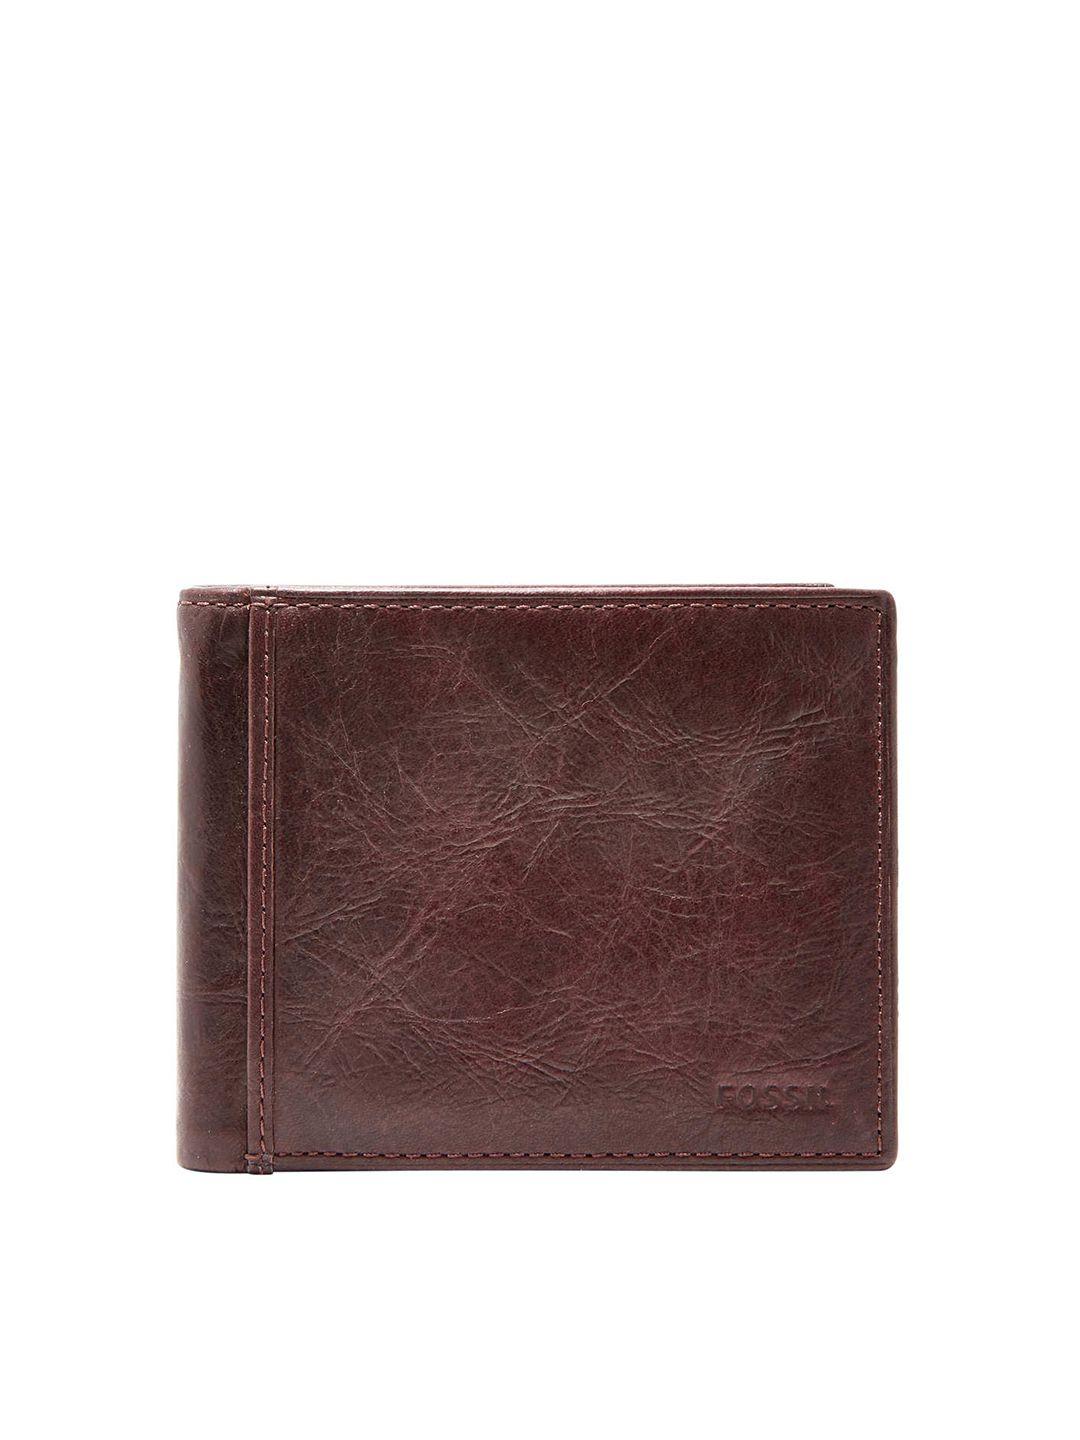 fossil men brown textured two fold leather wallet